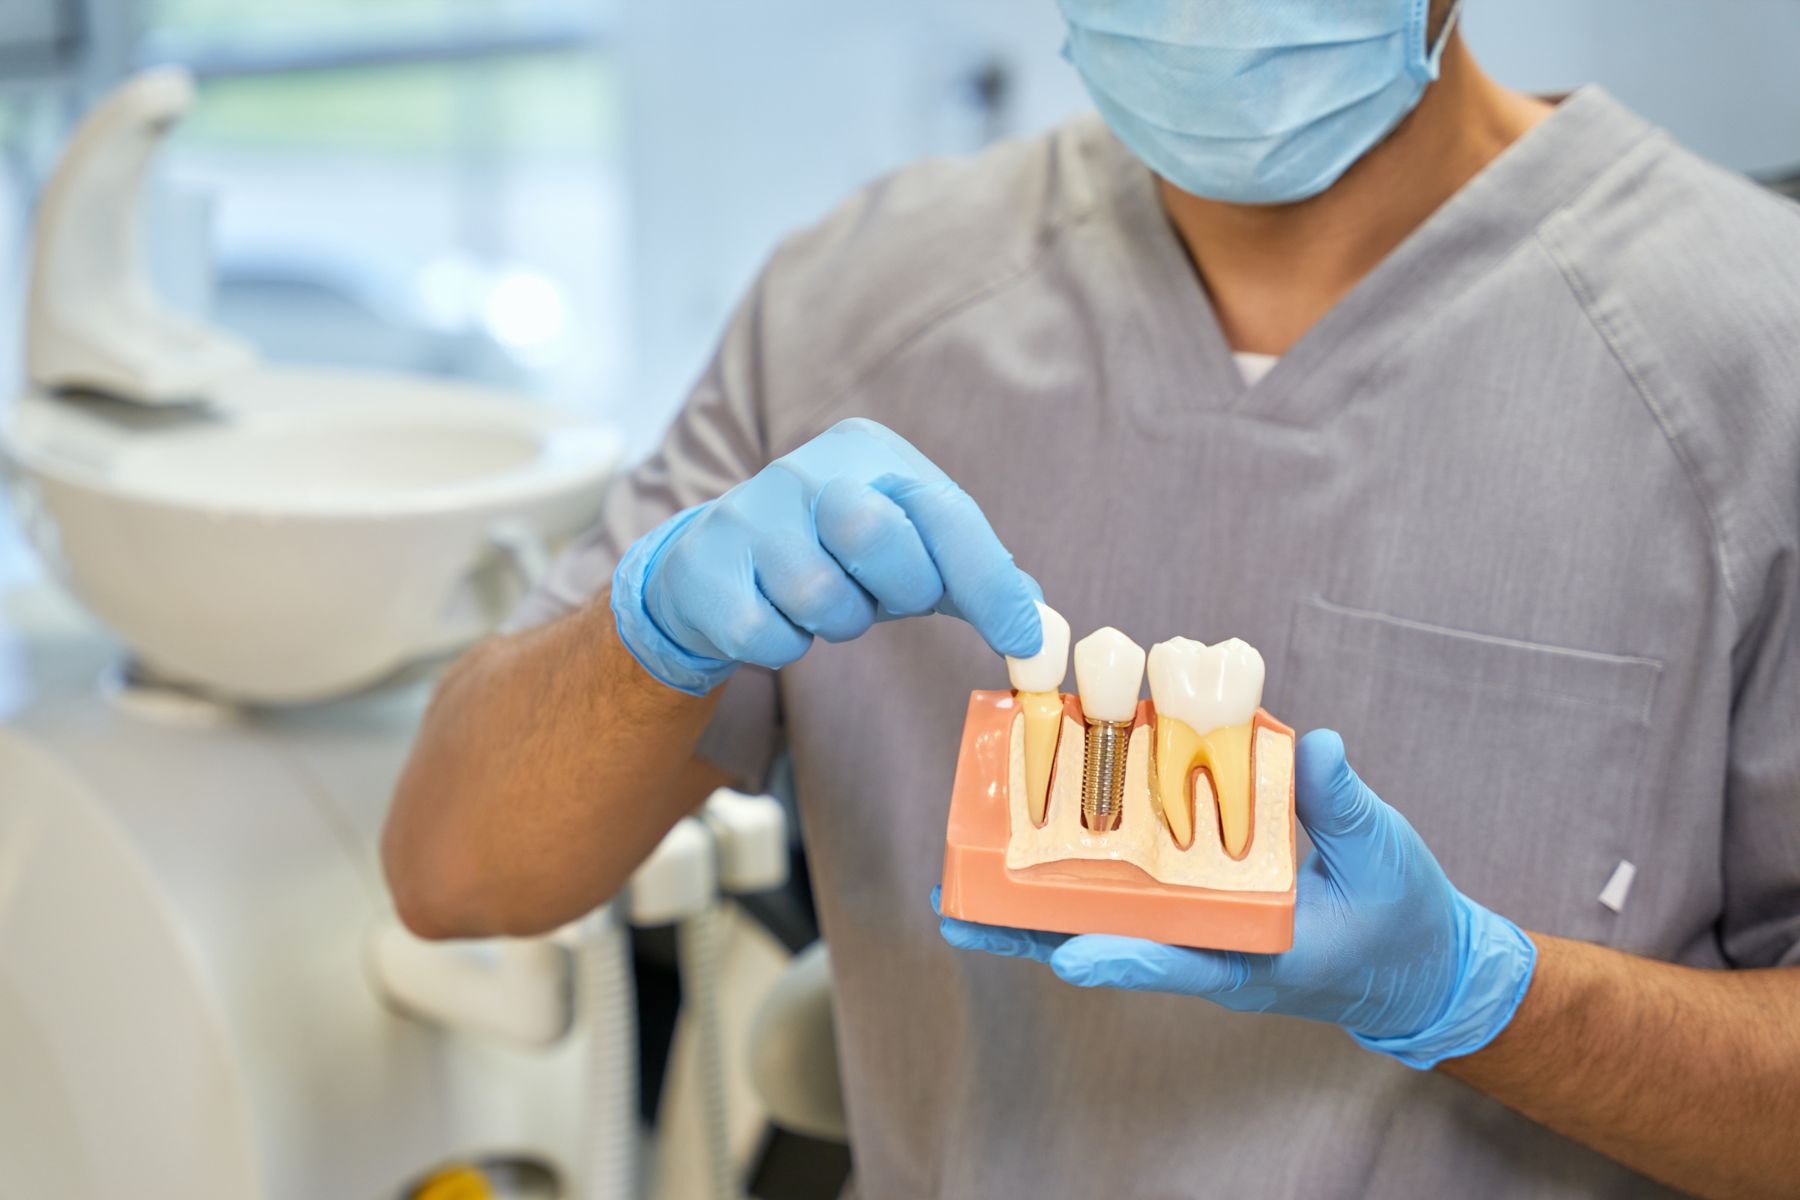 Can You Have Dental Implants With Severe Bone Loss?